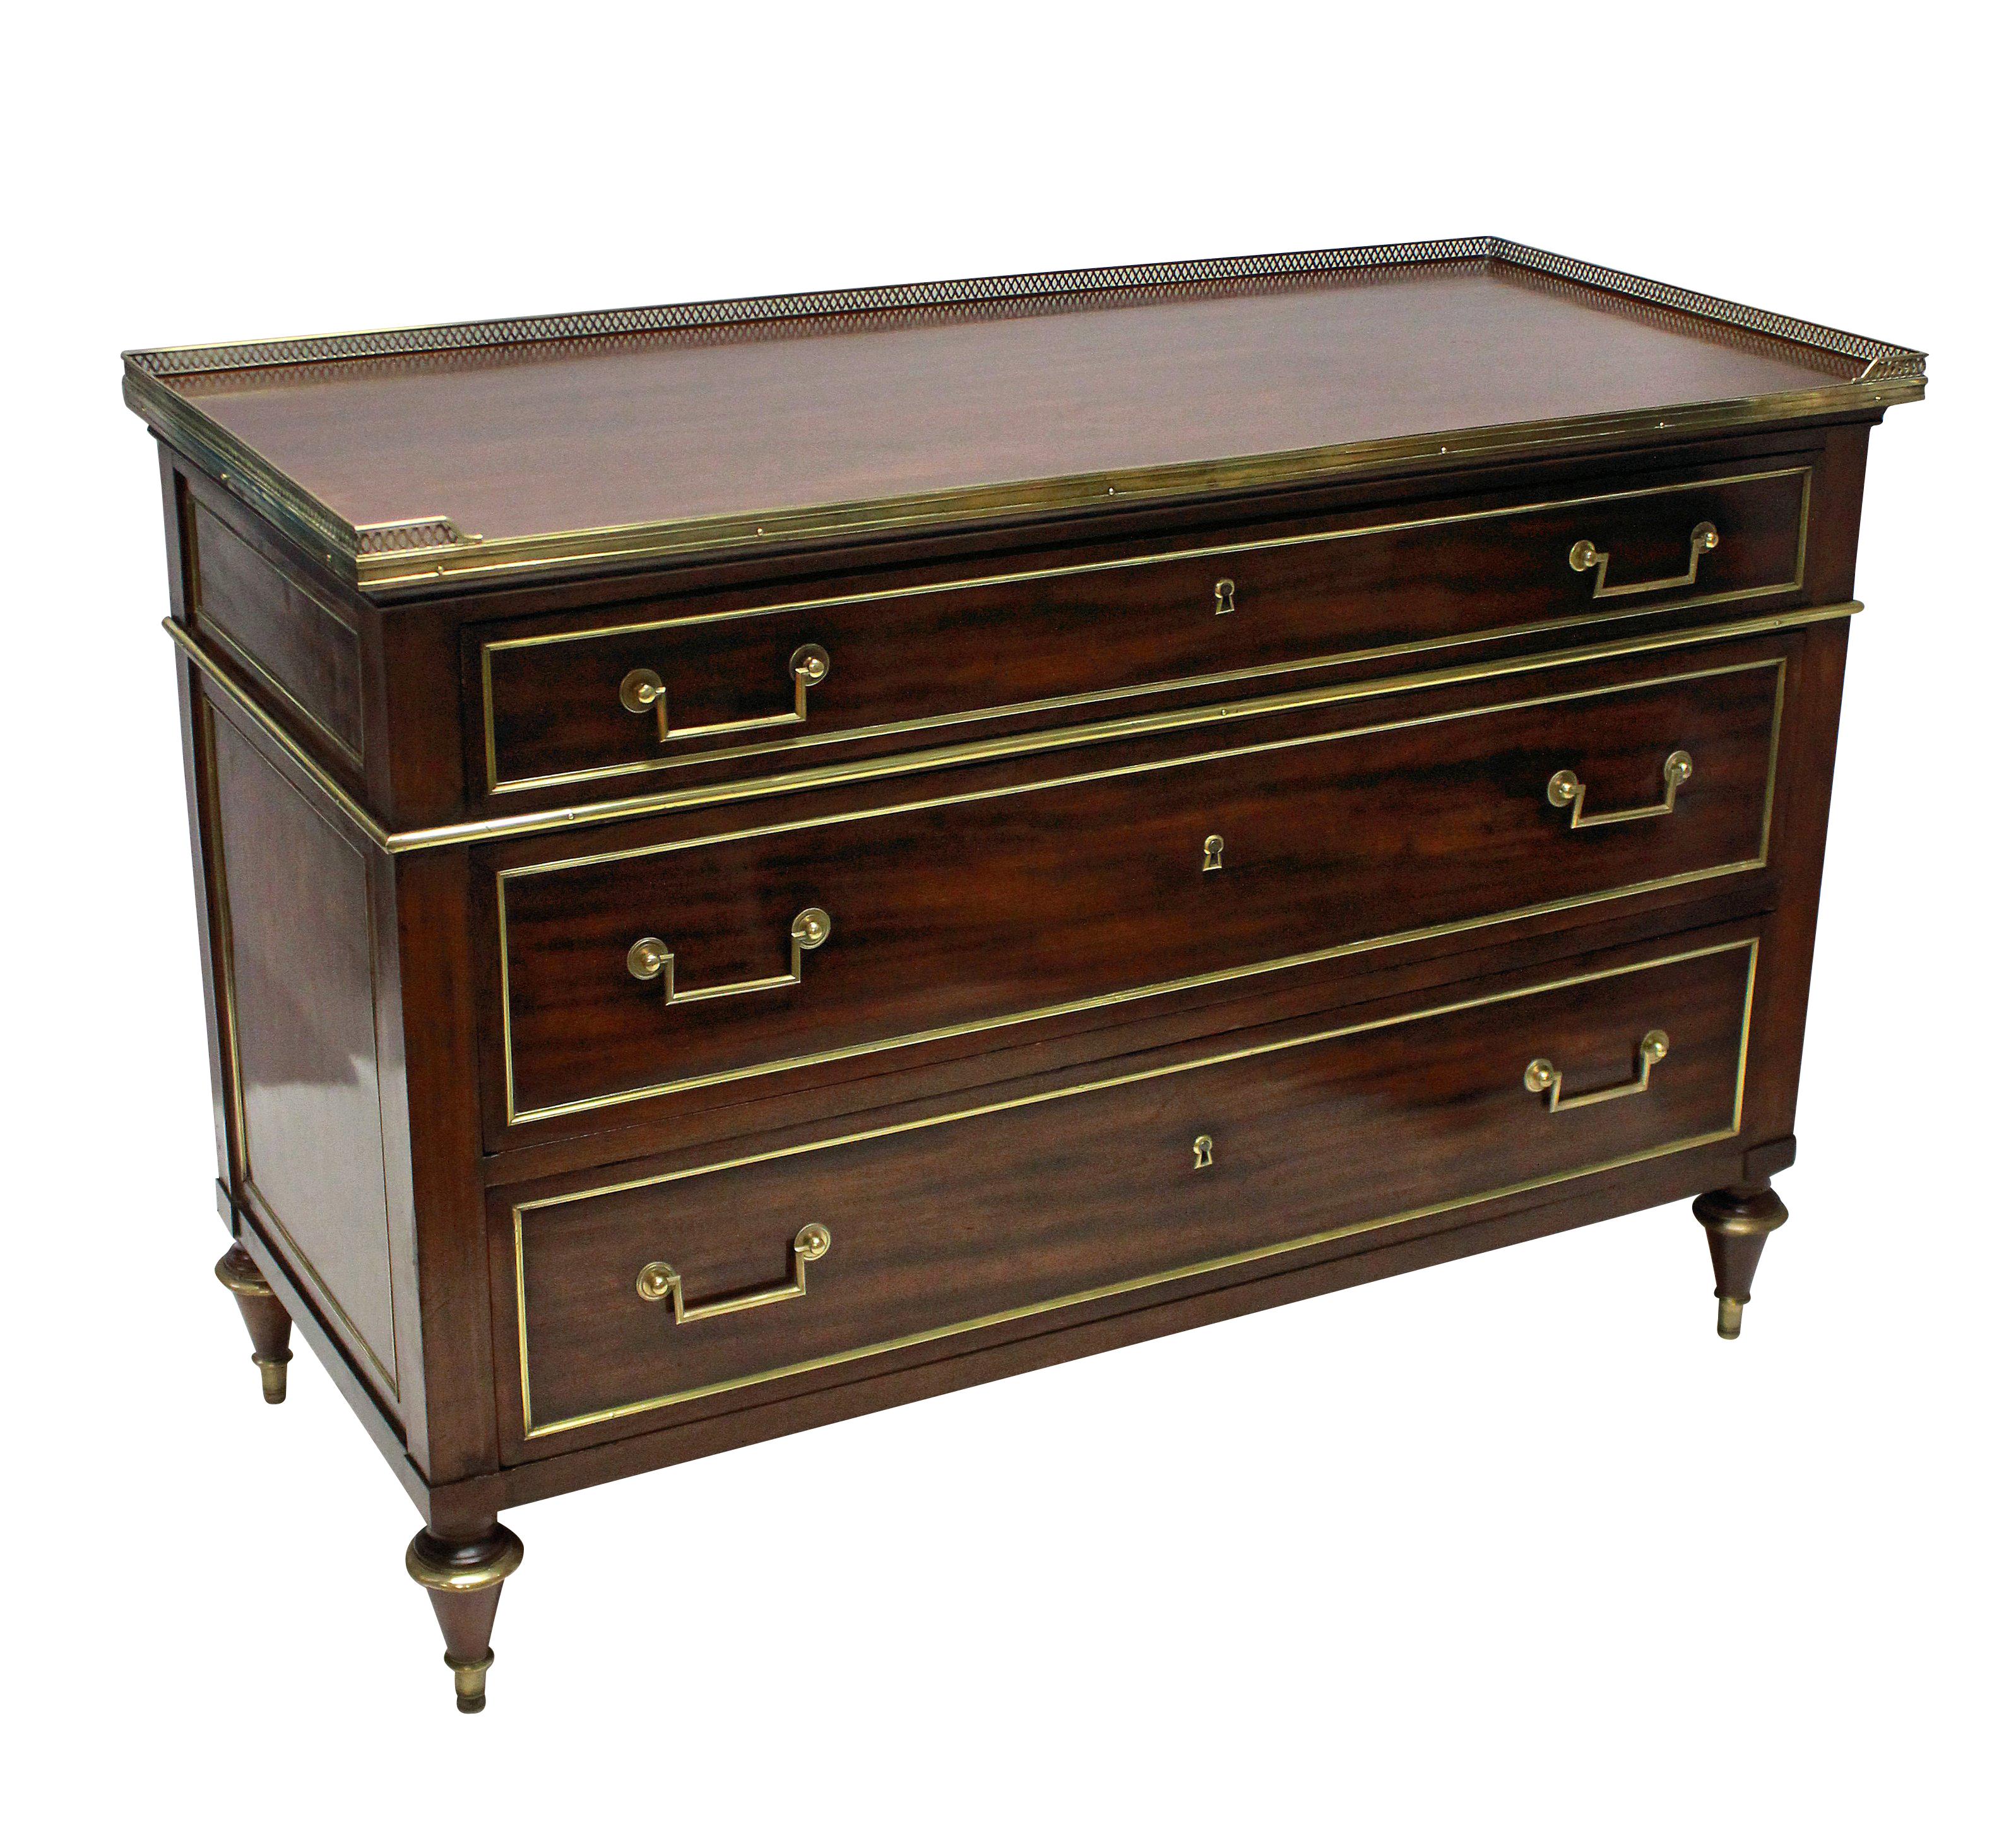 A fine French mahogany Directoire commode, oak lined and with brass detailing and pierced galleried top.